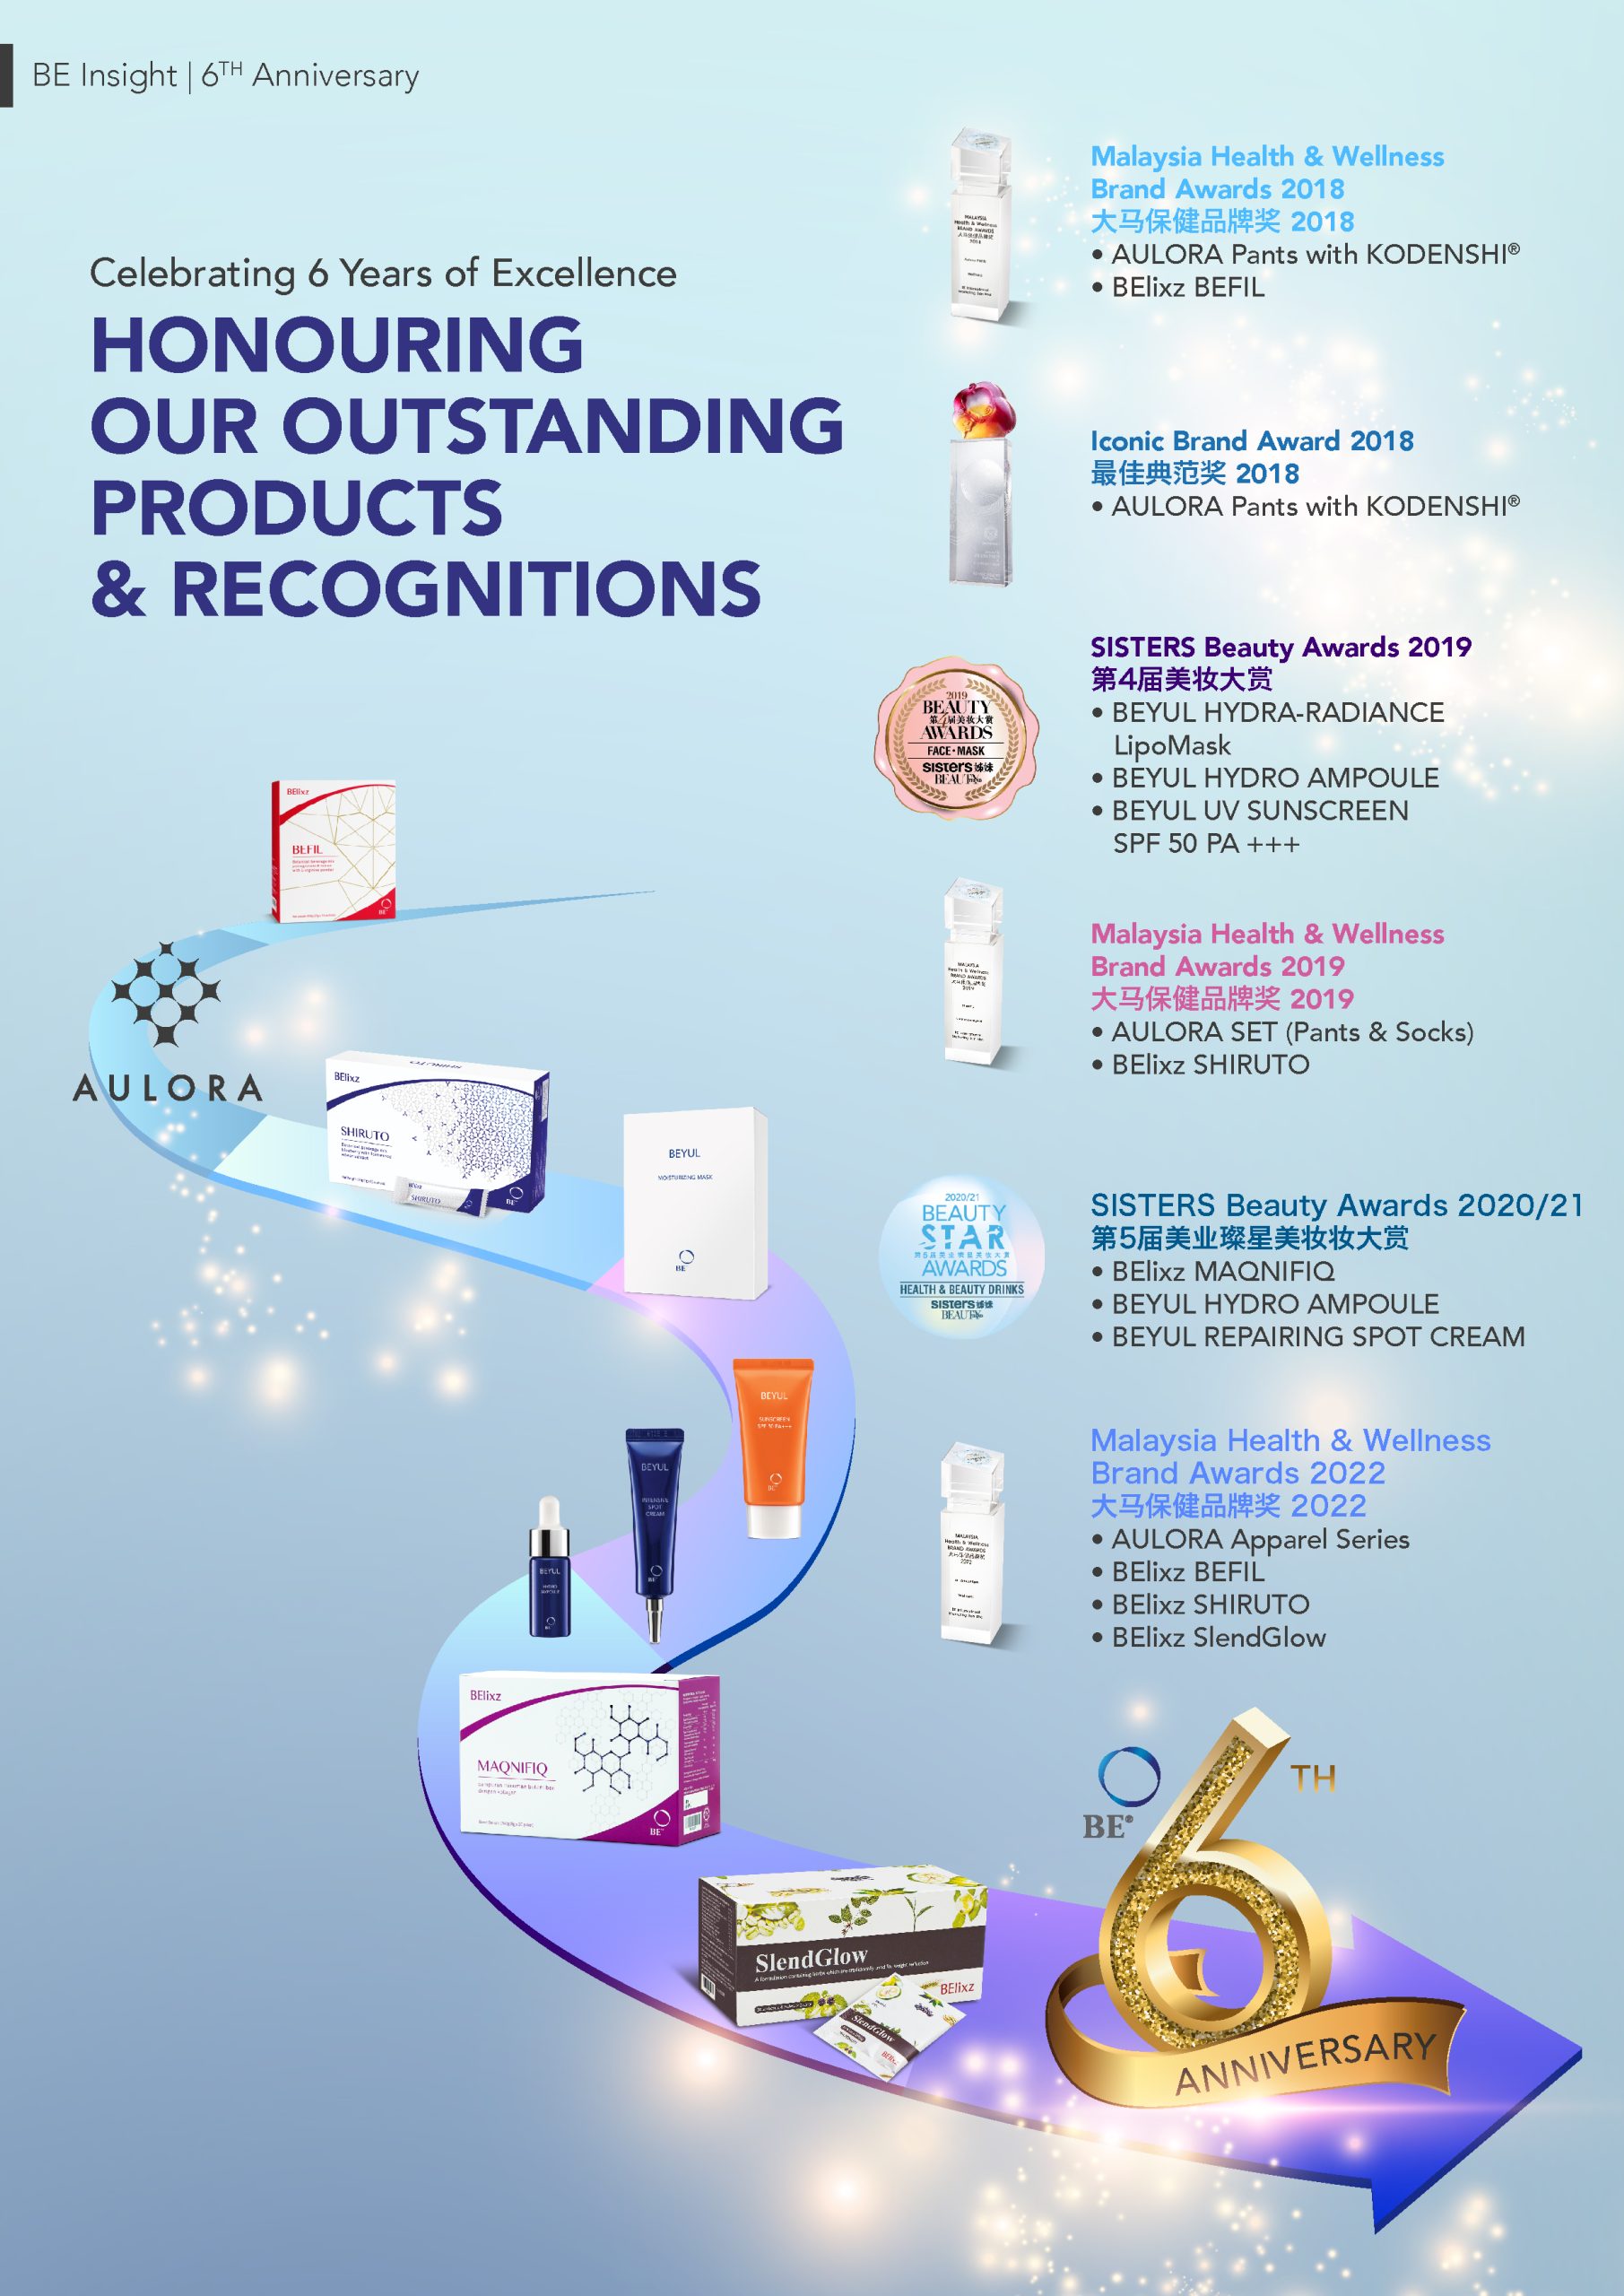 Celebrating 6 Years of Excellence : Honouring Our Outstanding Products & Recognitions